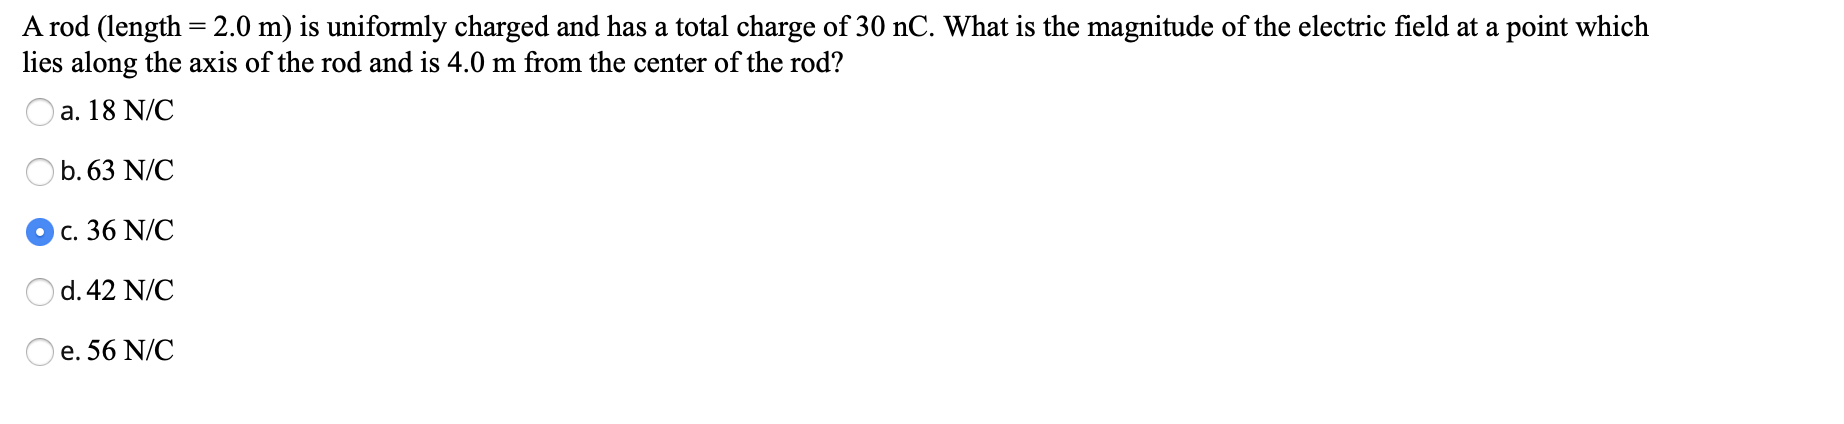 A rod (length = 2.0 m) is uniformly charged and has a total charge of 30 nC. What is the magnitude of the electric field at a point which
lies along the axis of the rod and is 4.0 m from the center of the rod?
a, 18 N/C
b.63 N/C
Oc. 36 N/C
d.42 N/C
e. 56 N/C
